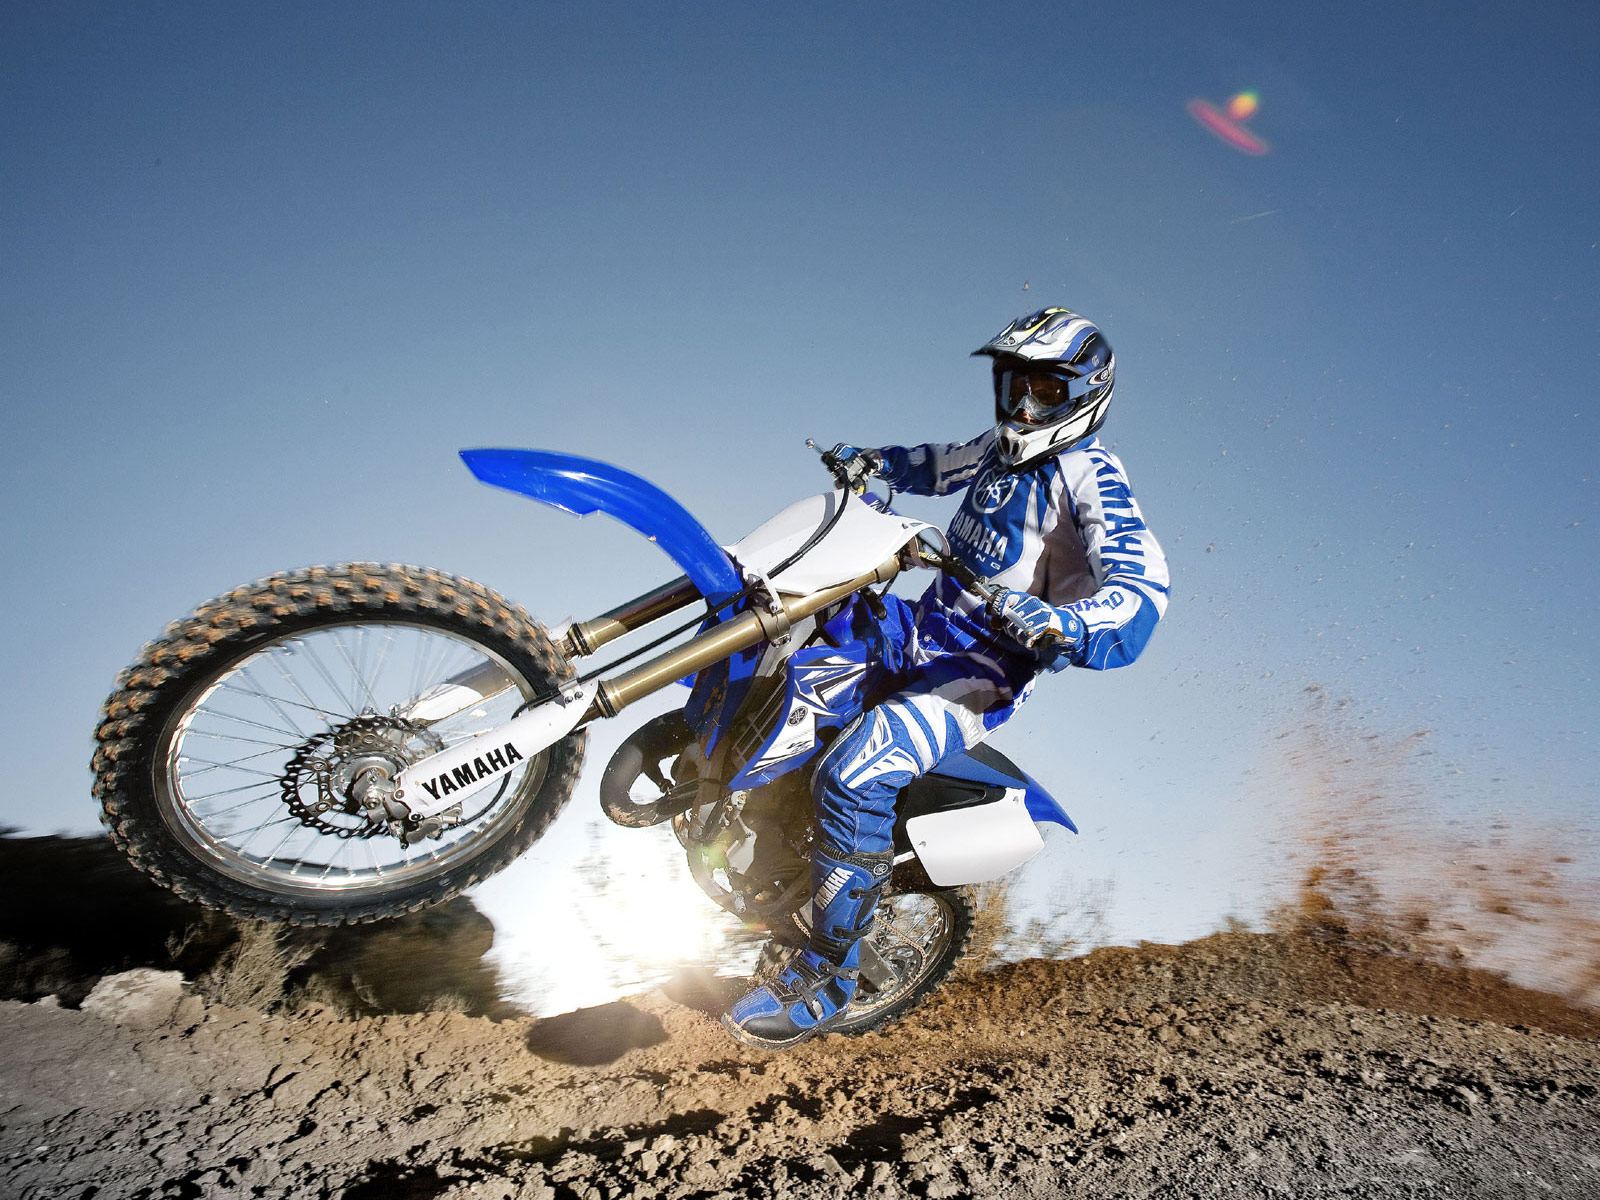 Bike Race Motocross Wallpaper HD We Provide The Best Collection Of